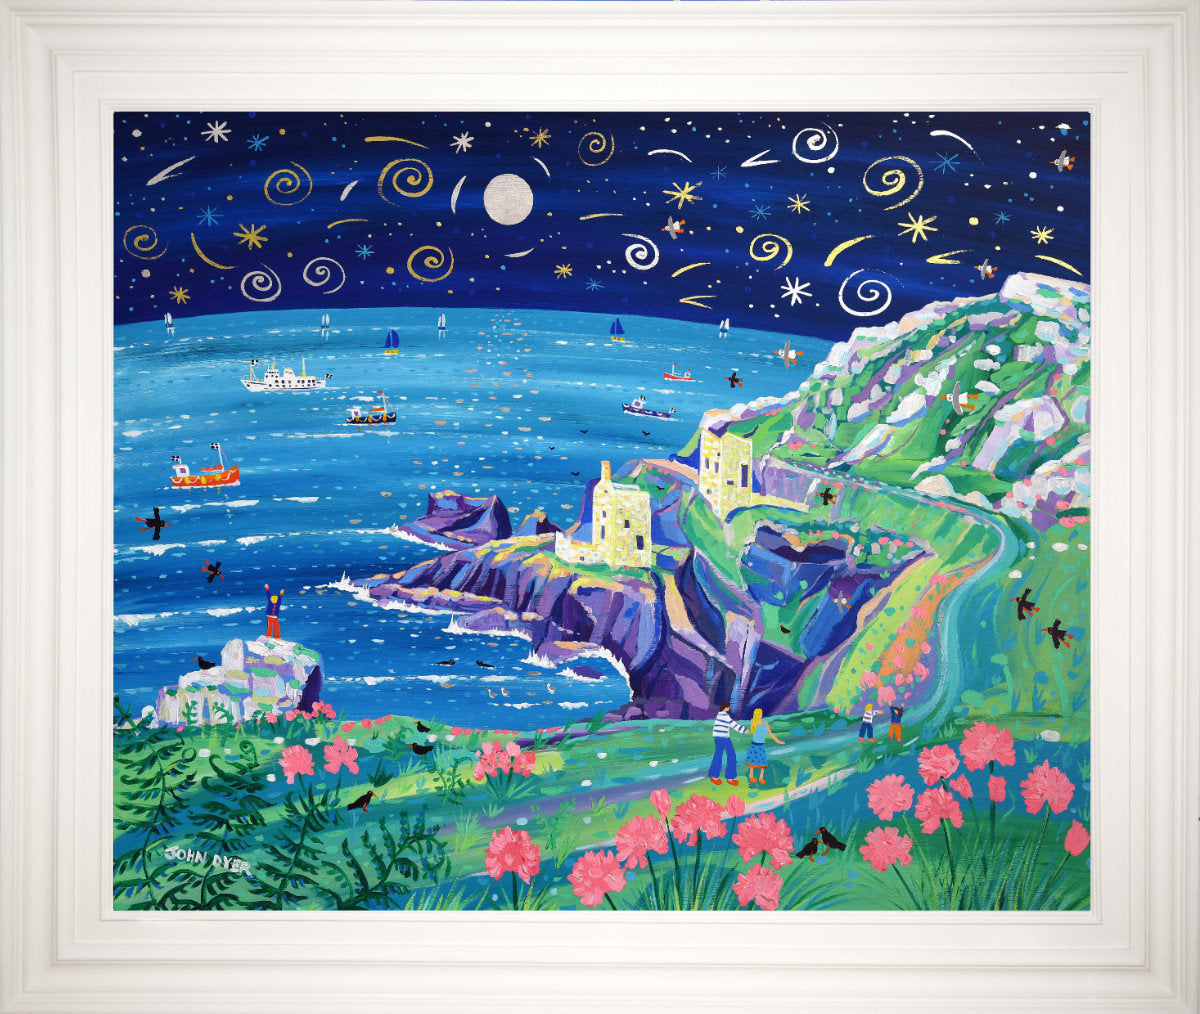 &#39;Shooting Stars over Botallack&#39;. 33 x 40 inches original art acrylic on board. Paintings of Cornwall by Cornish Artist John Dyer from our Cornwall Art Gallery